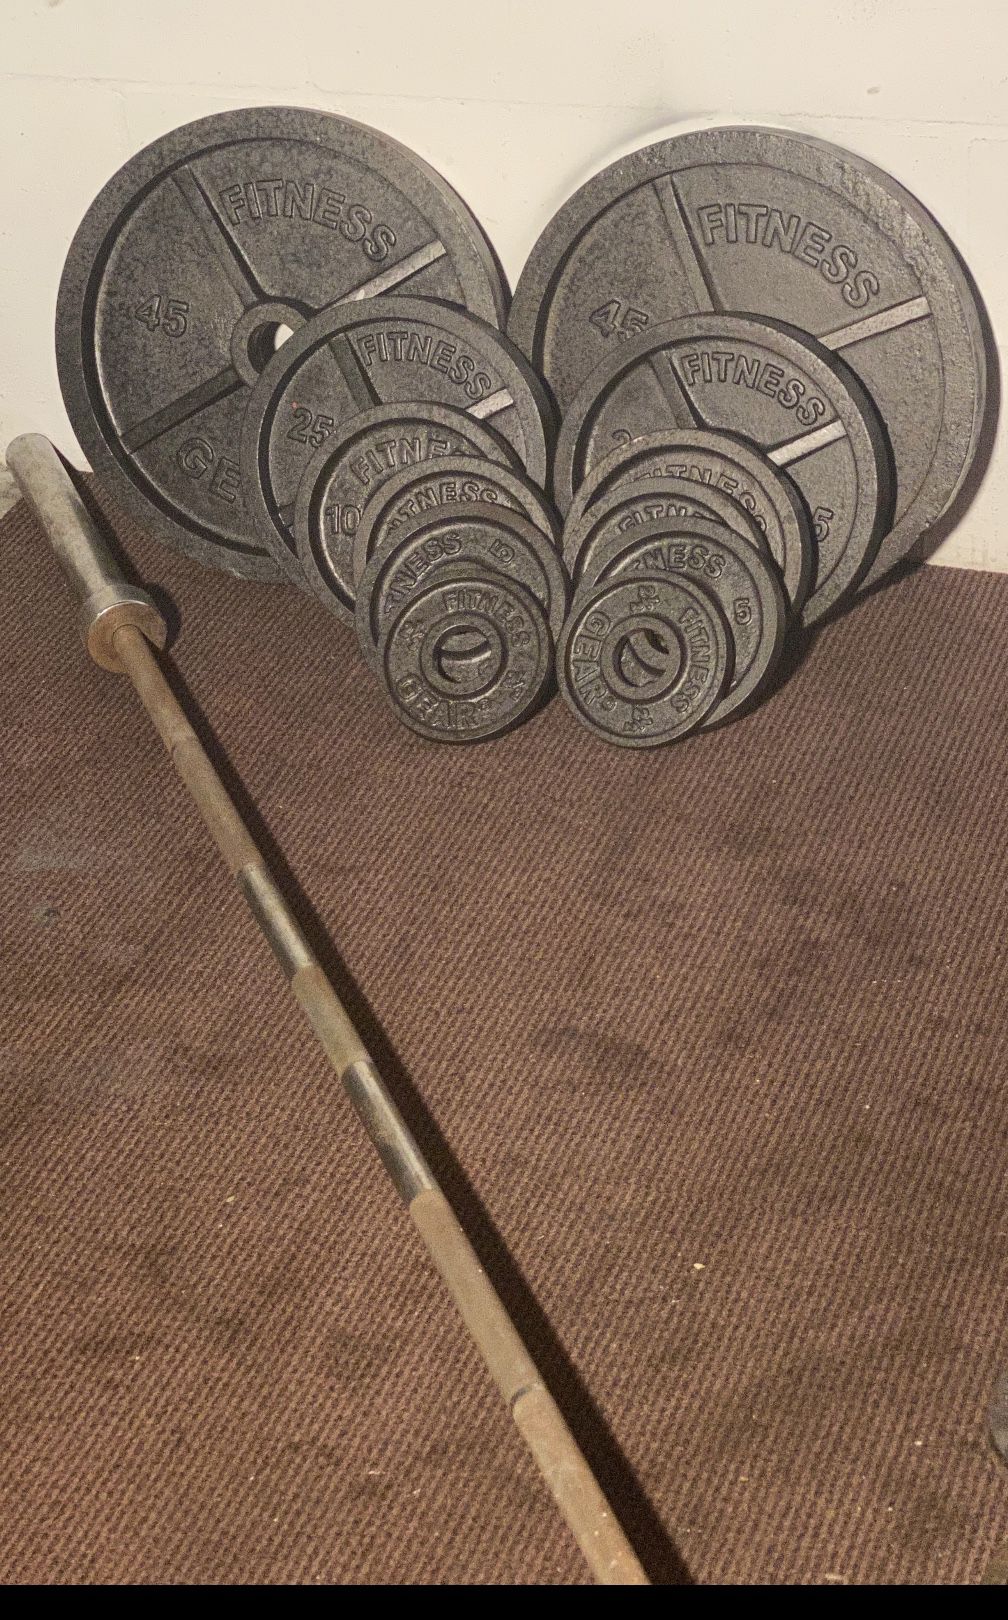 Olympic weights set and barbell